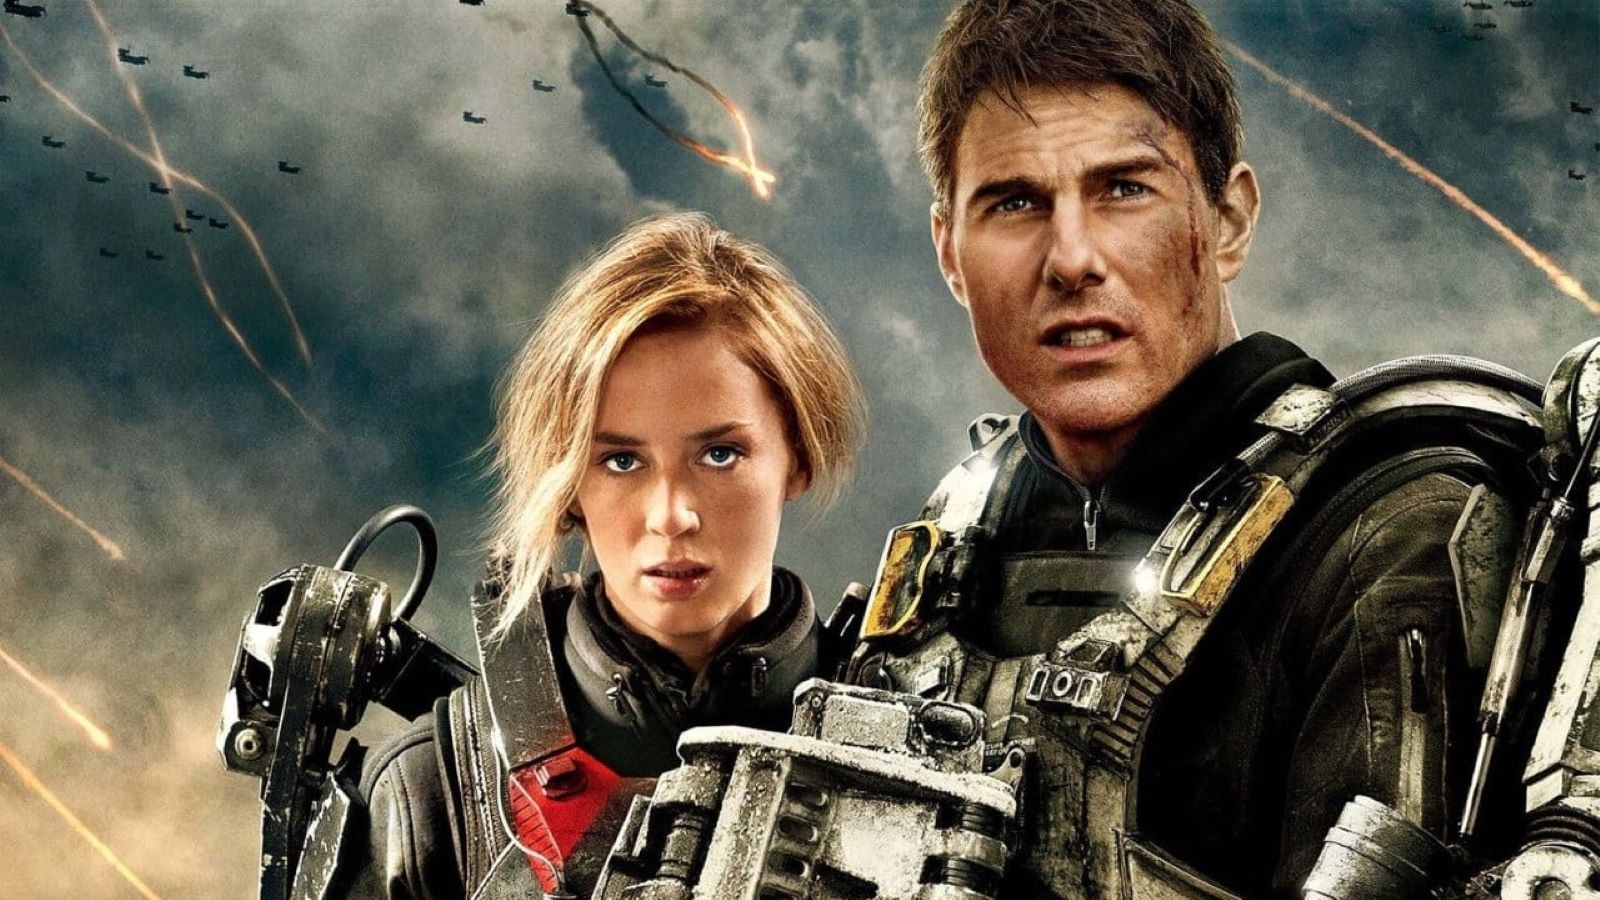 Edge of tomorrow - Without tomorrow, cast and plot of tonight's film on Italia 1